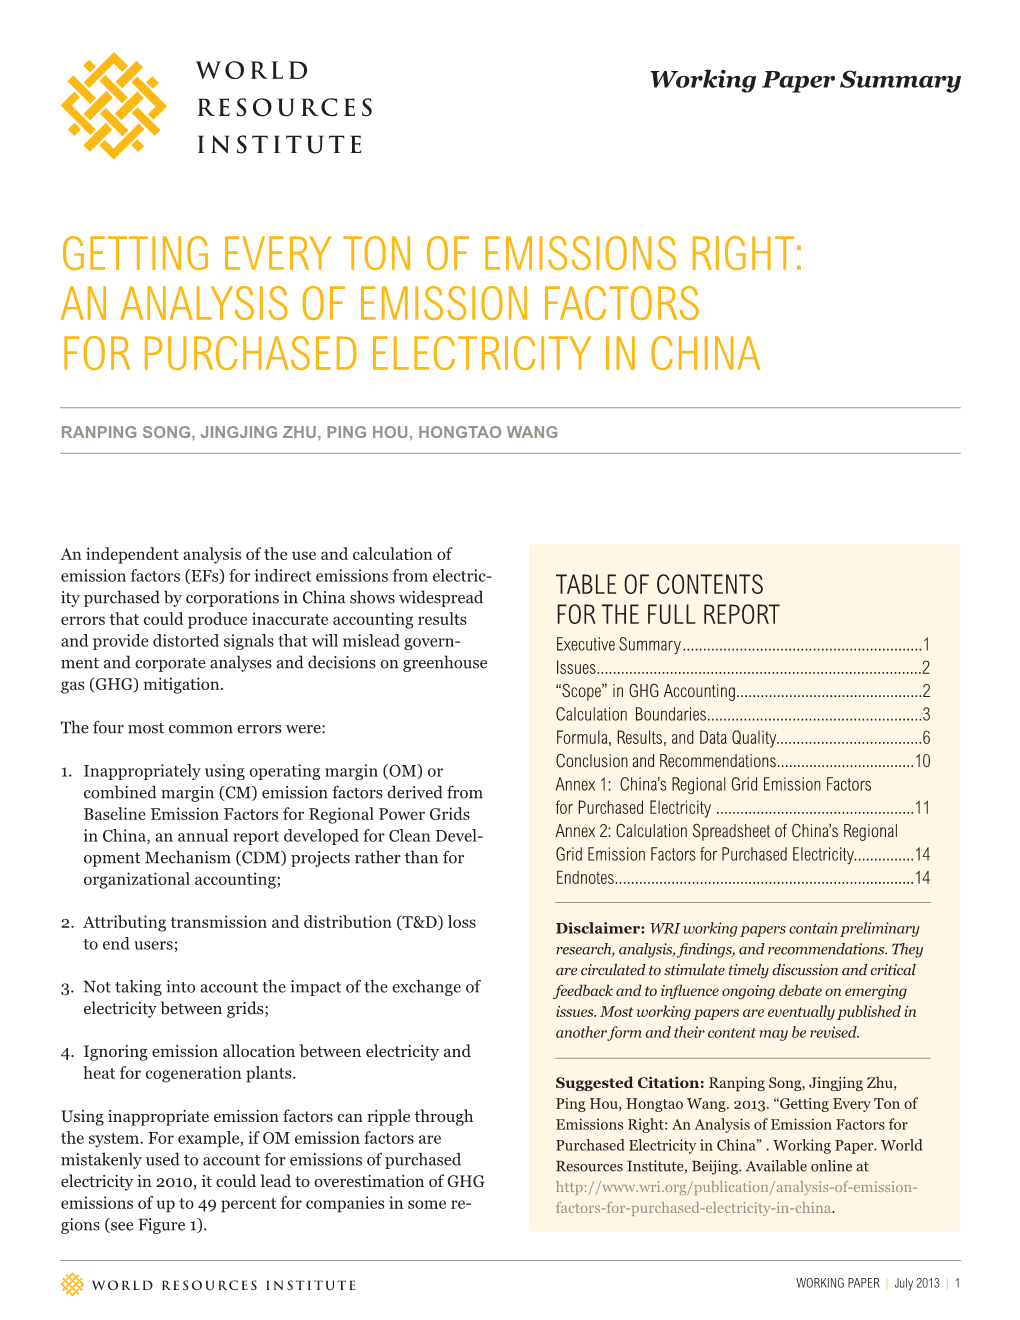 Getting Every Ton of Emissions Right: an Analysis of Emission Factors for Purchased Electricity in China